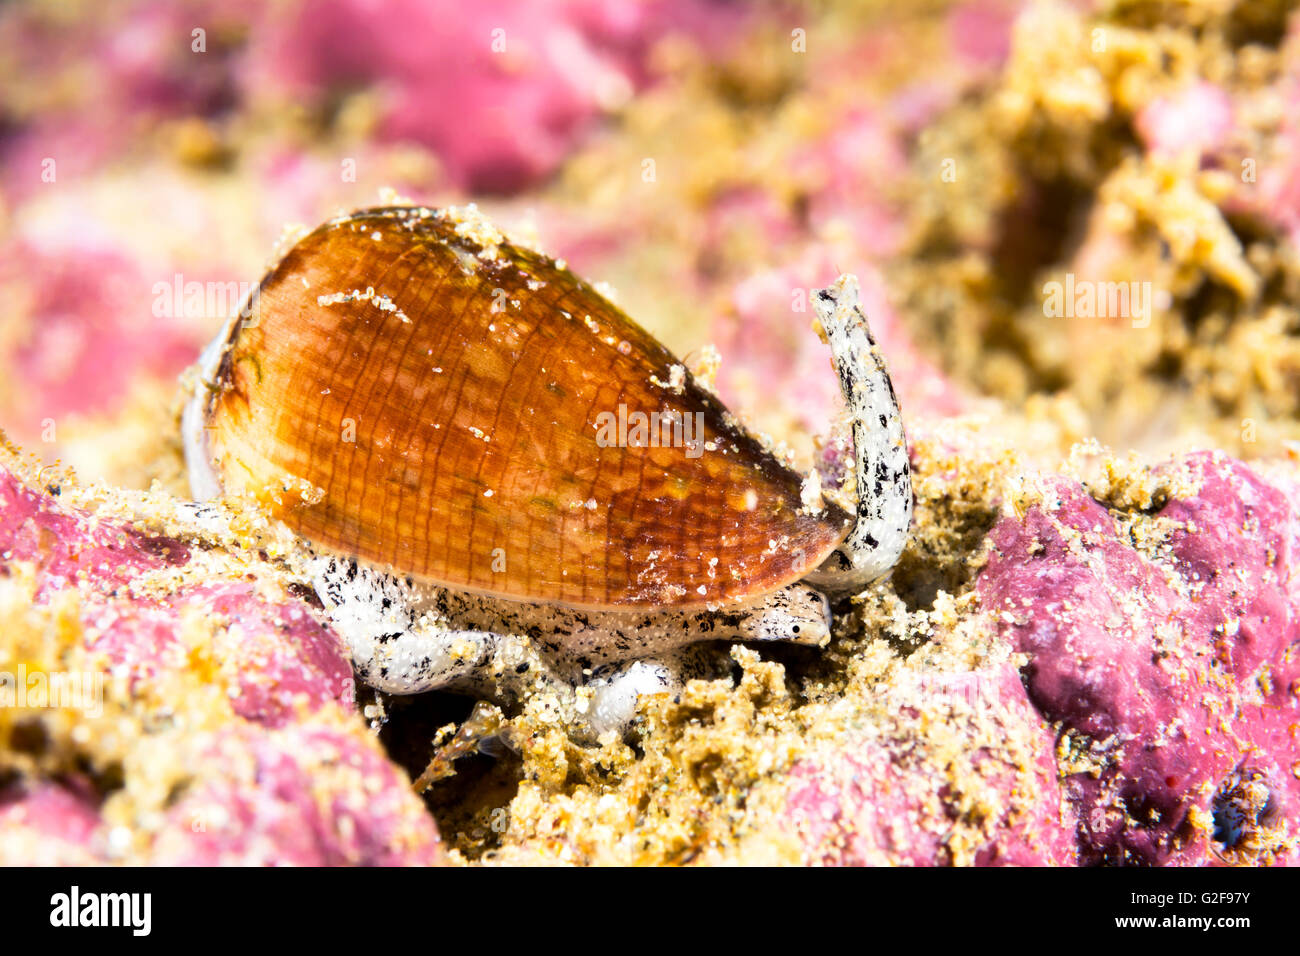 A poisonous California cone snail crawls across a reef looking for prey to paralyze and eat. Stock Photo